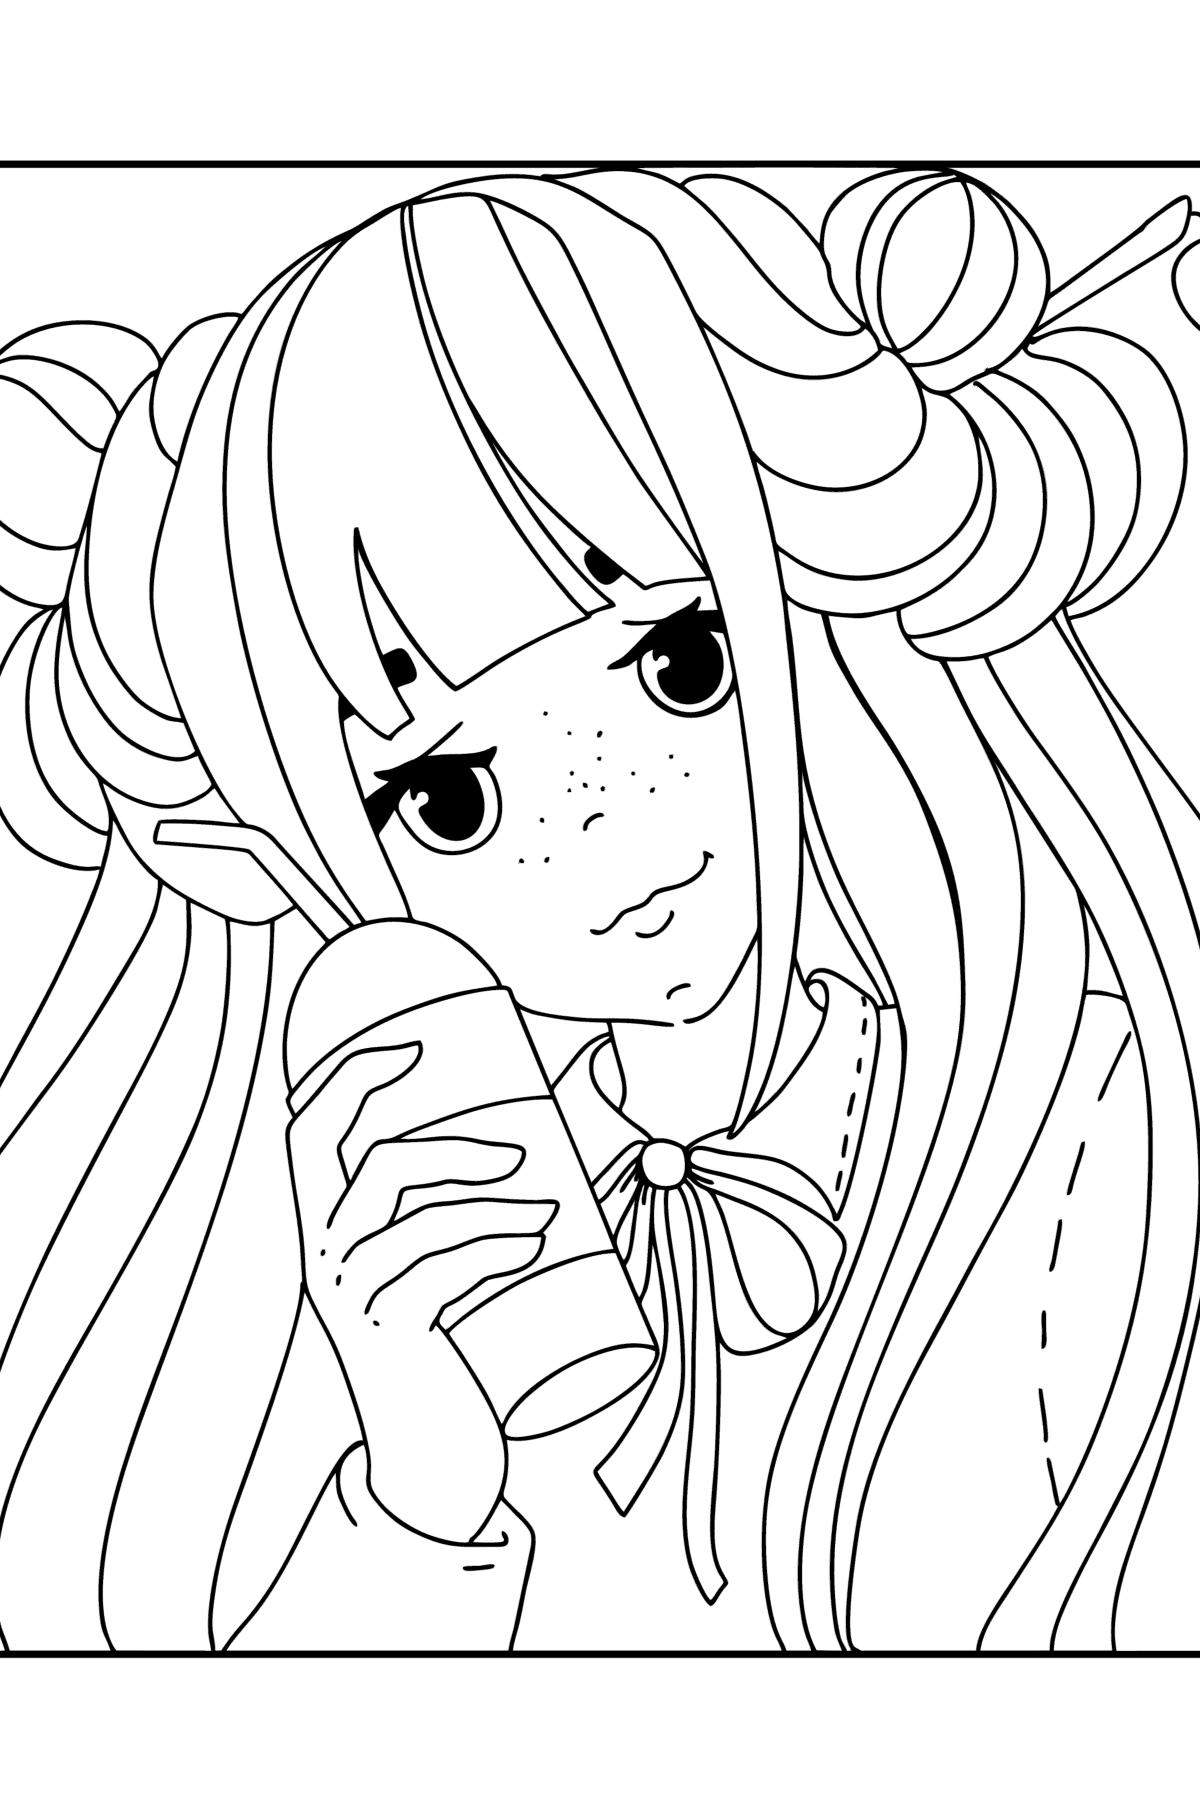 Modern girl coloring page - Coloring Pages for Kids